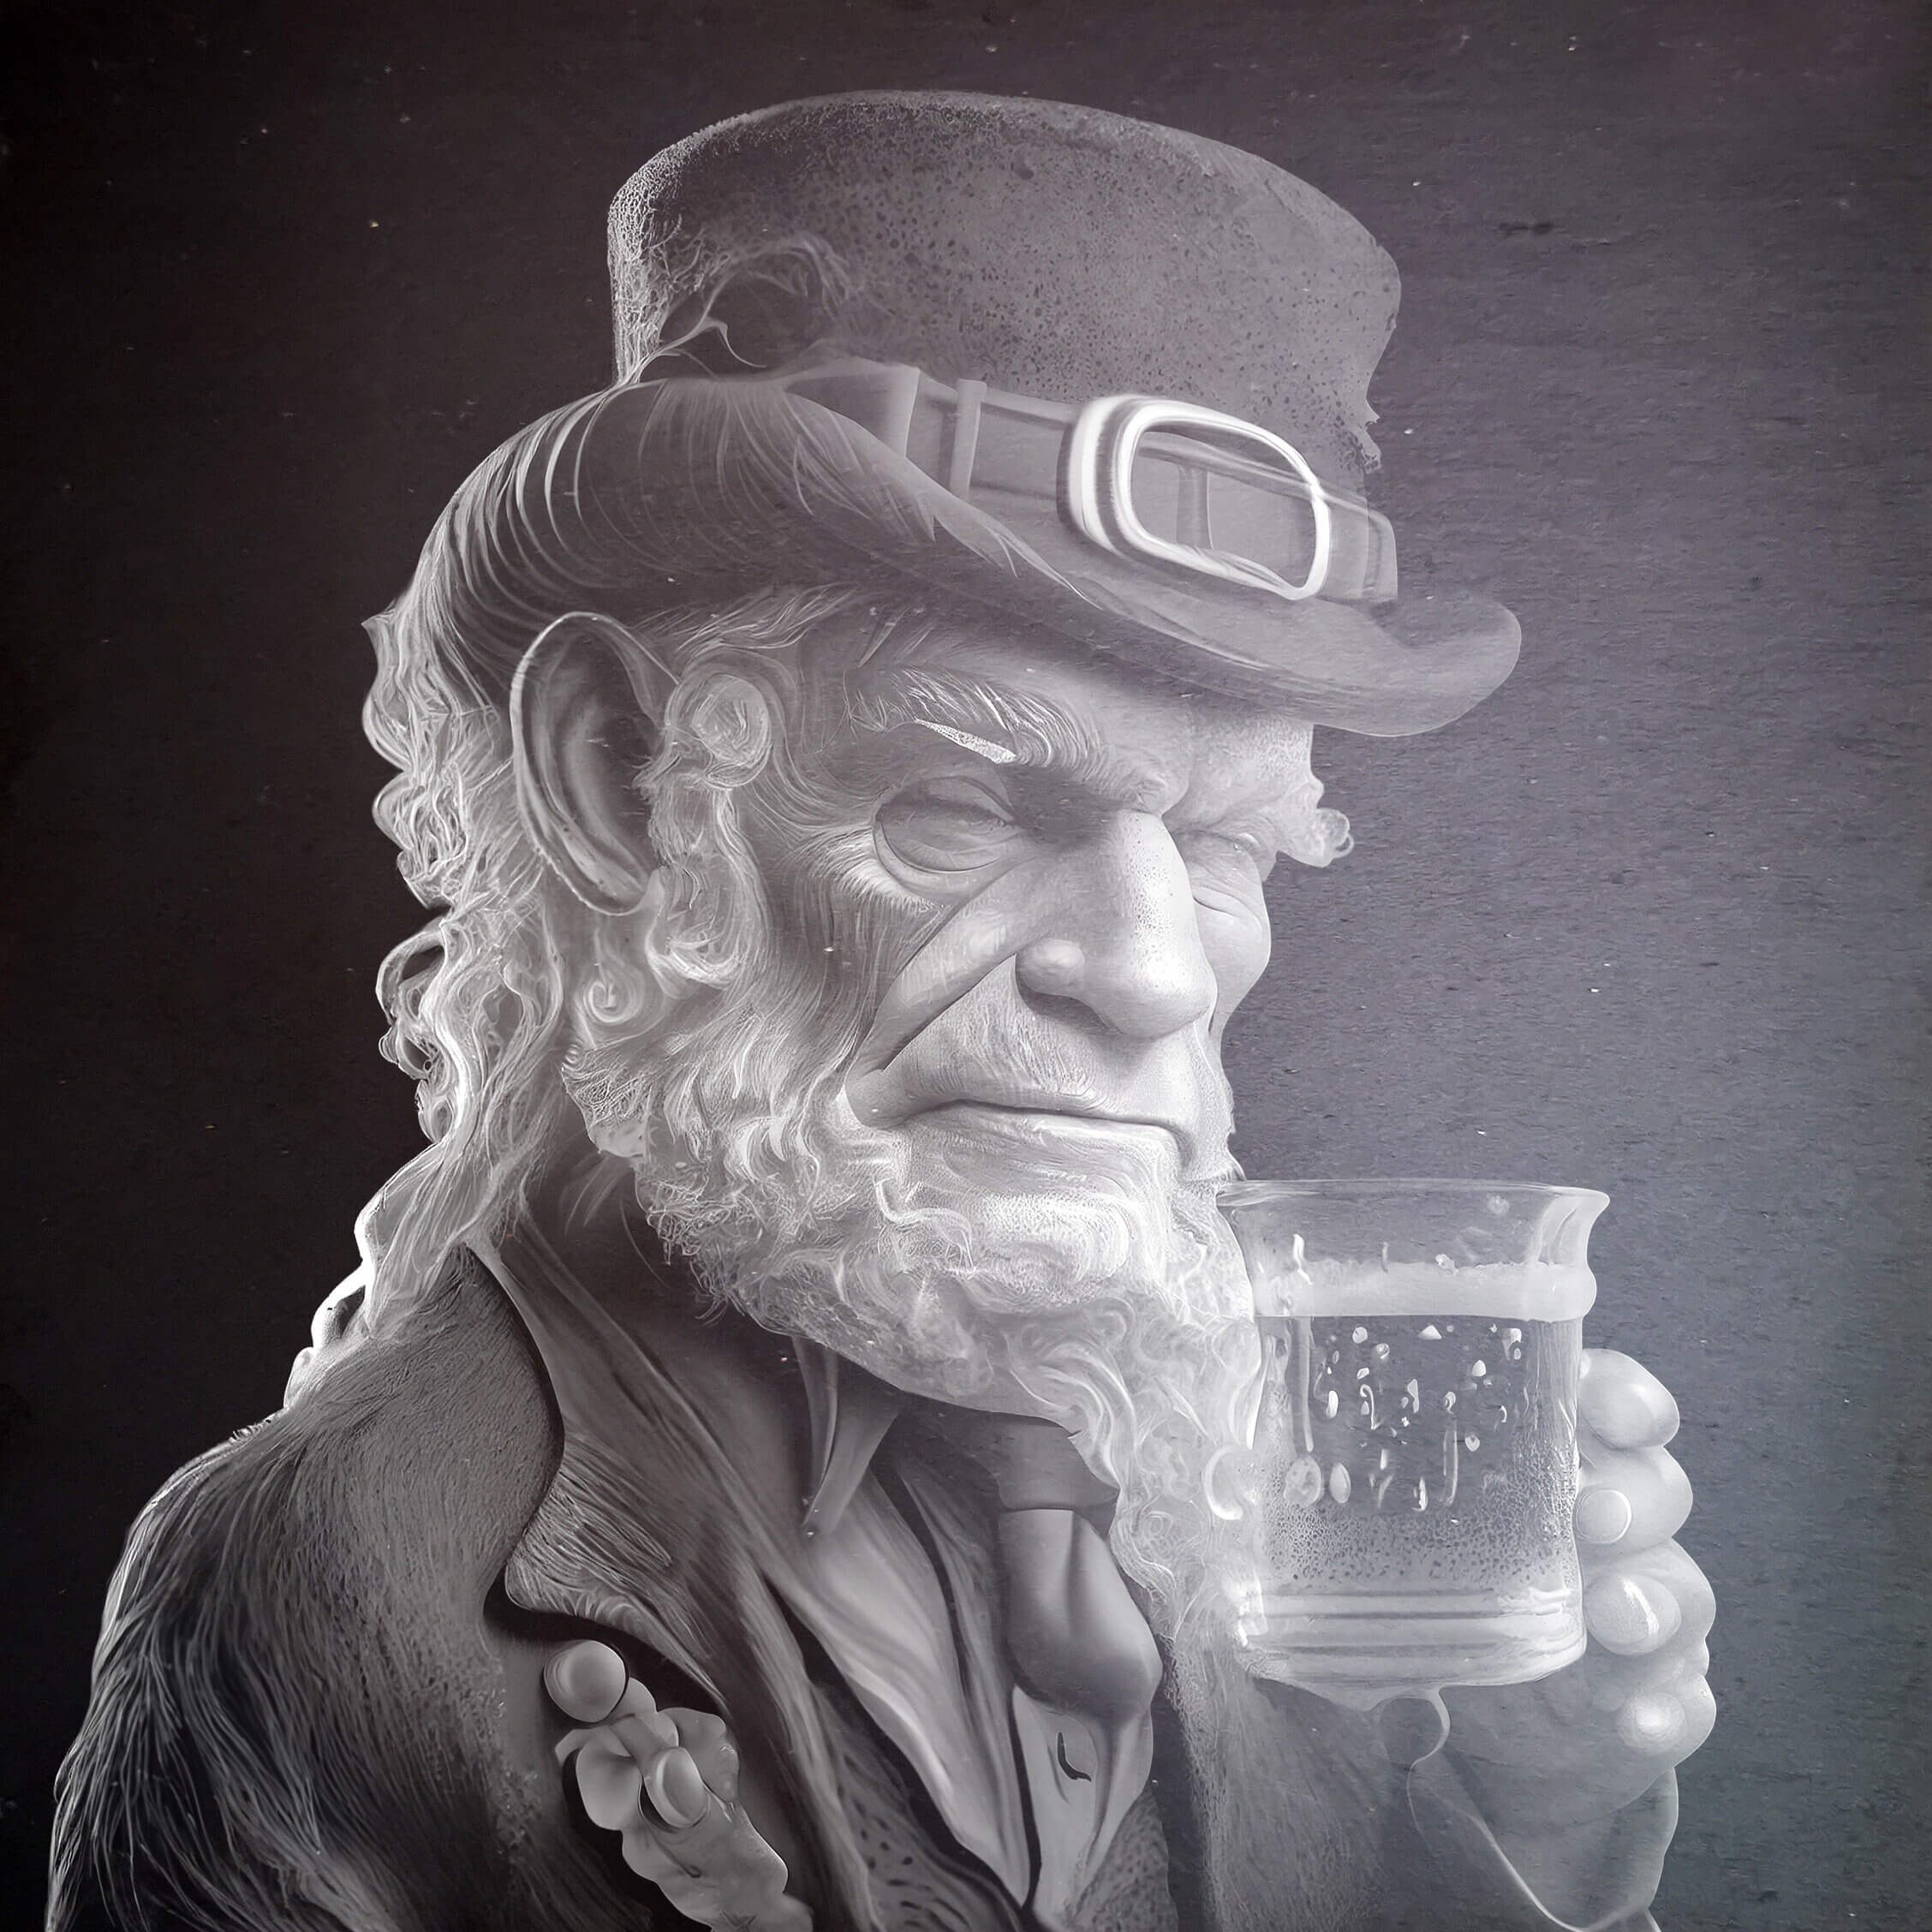 Slate - The Leprechaun's Craft: Carefully Crafted Beer